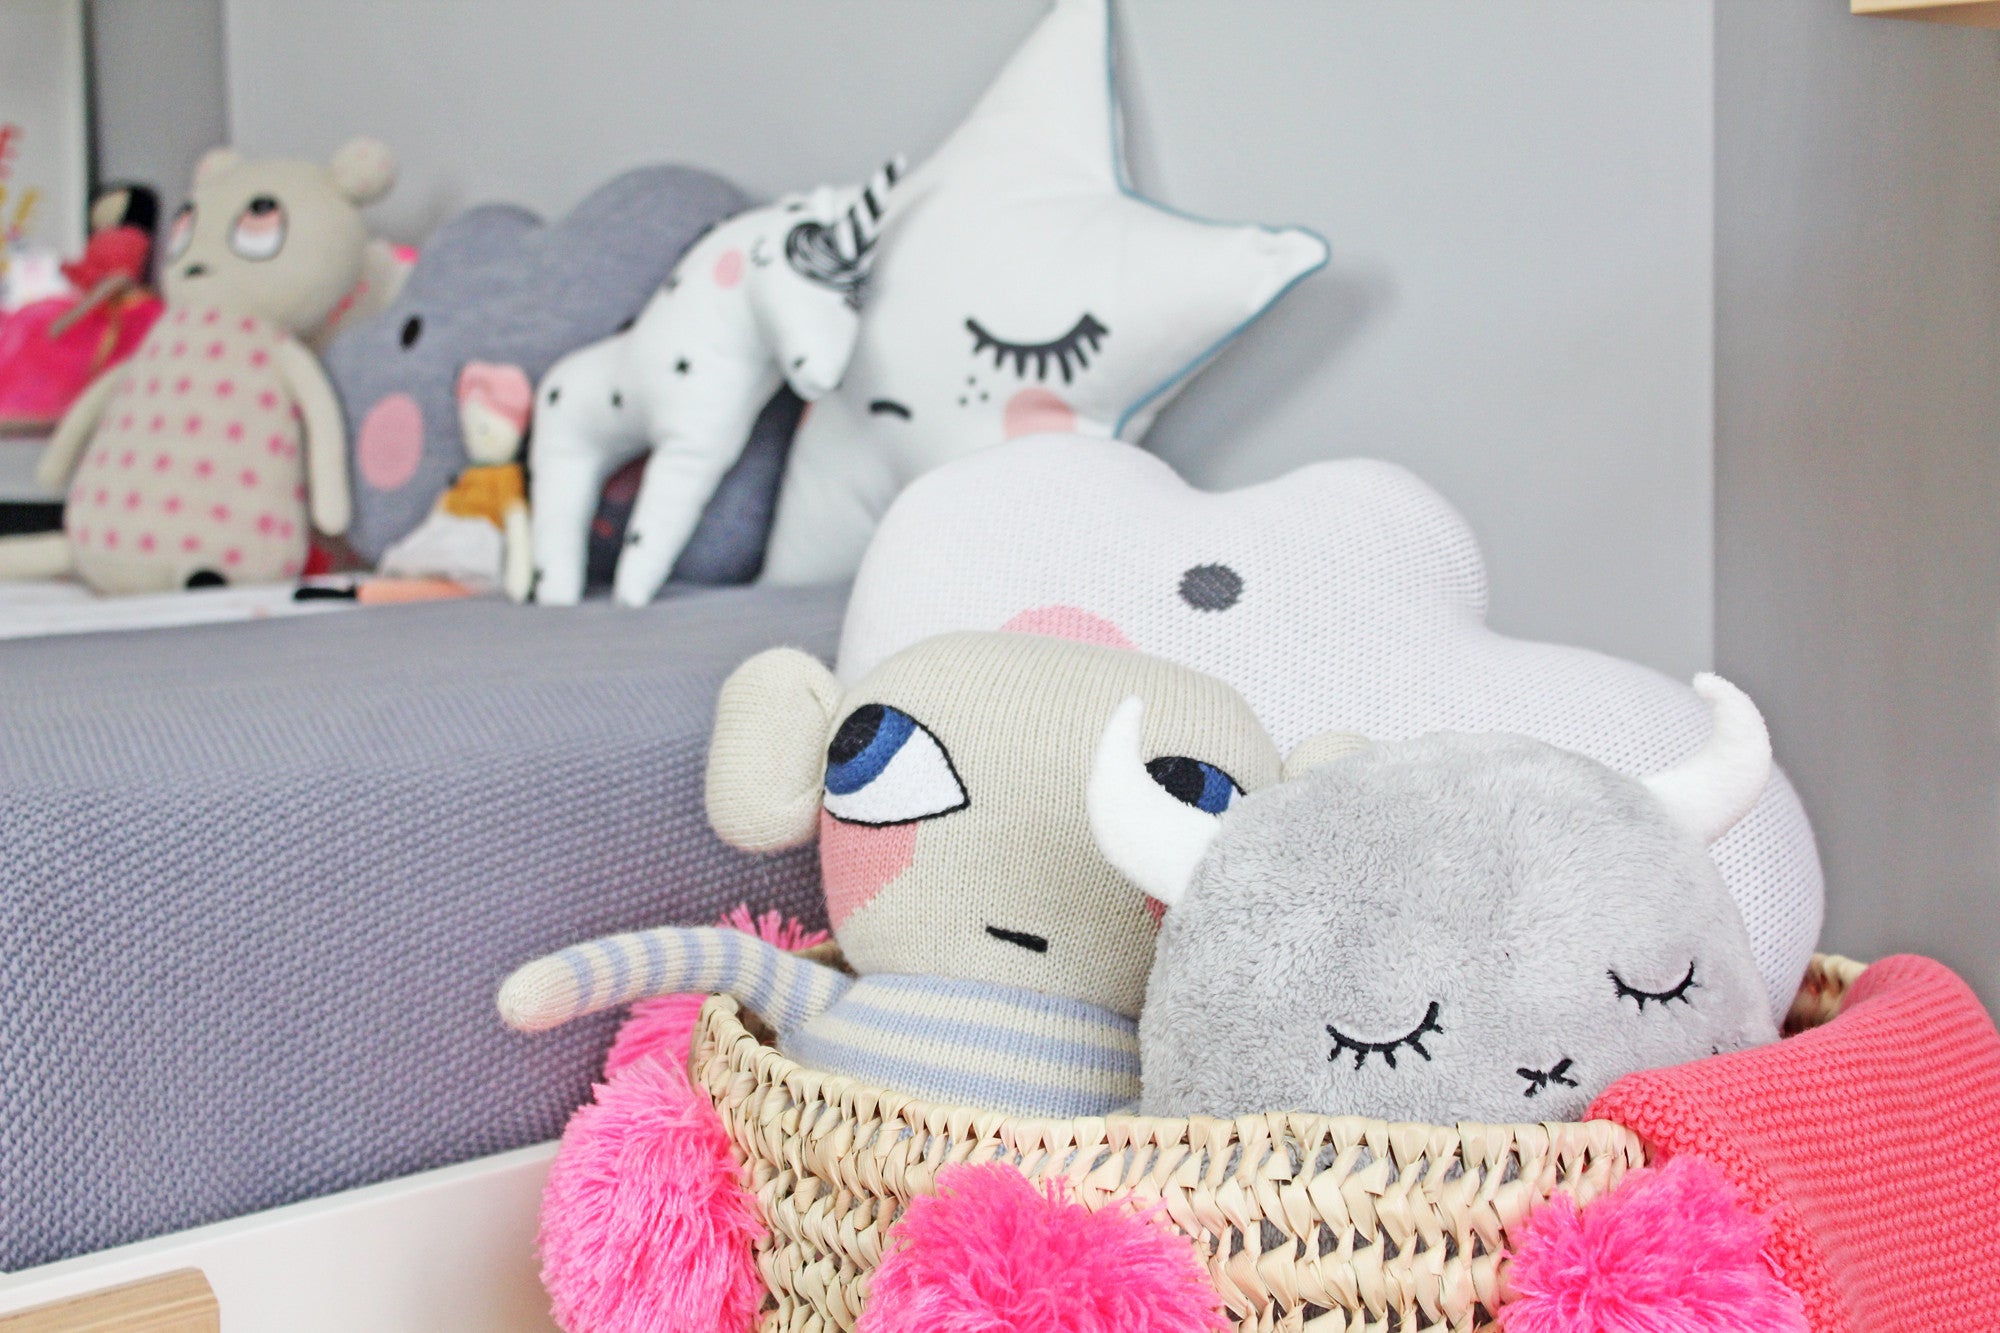 Toys and accessories, children's room decor available at Bobby Rabbit.